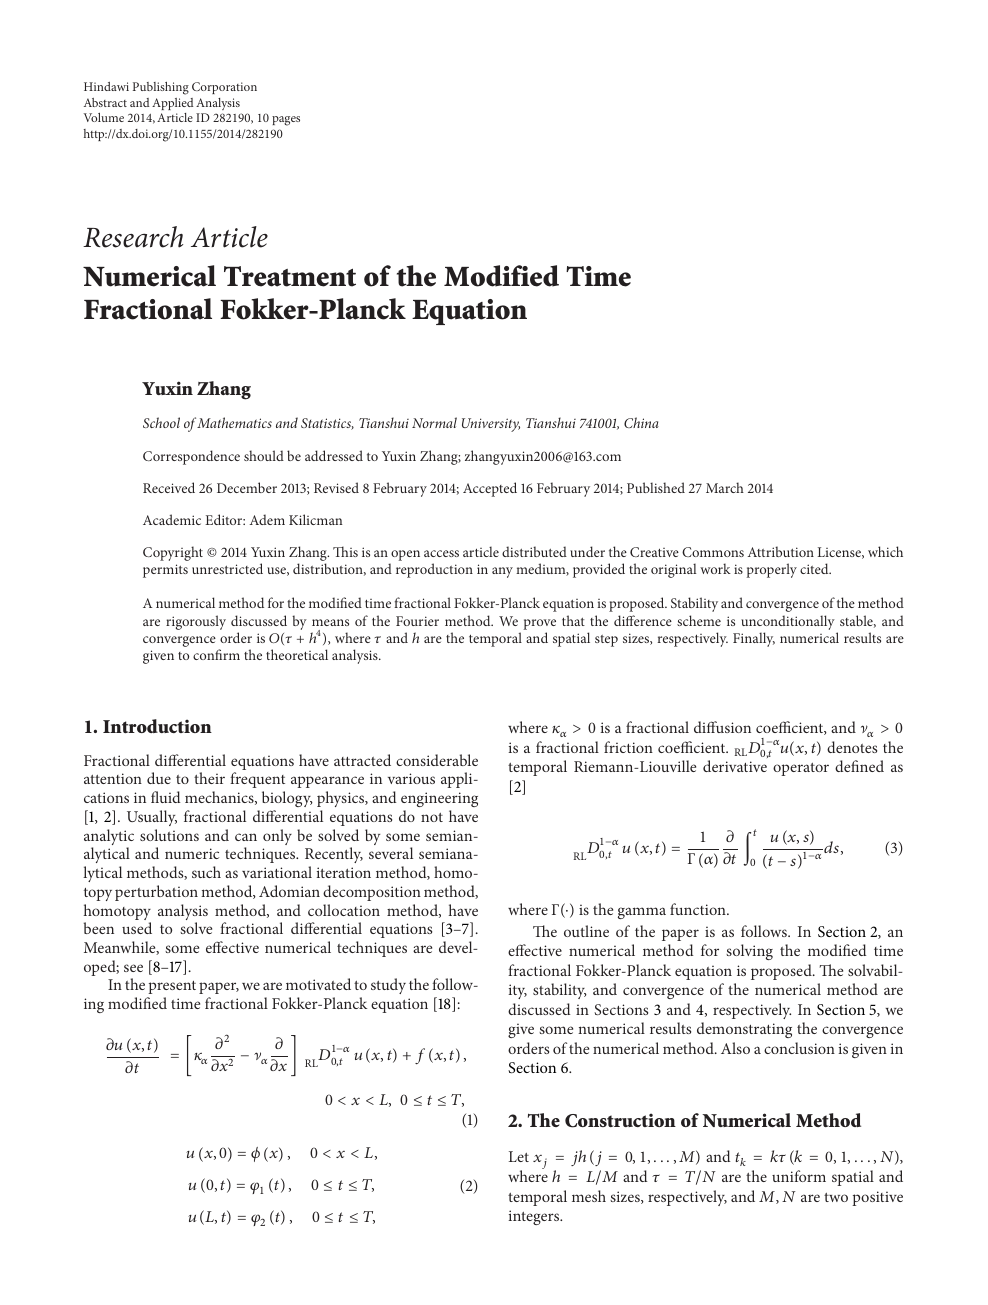 Numerical Treatment Of The Modified Time Fractional Fokker Planck Equation Topic Of Research Paper In Mathematics Download Scholarly Article Pdf And Read For Free On Cyberleninka Open Science Hub